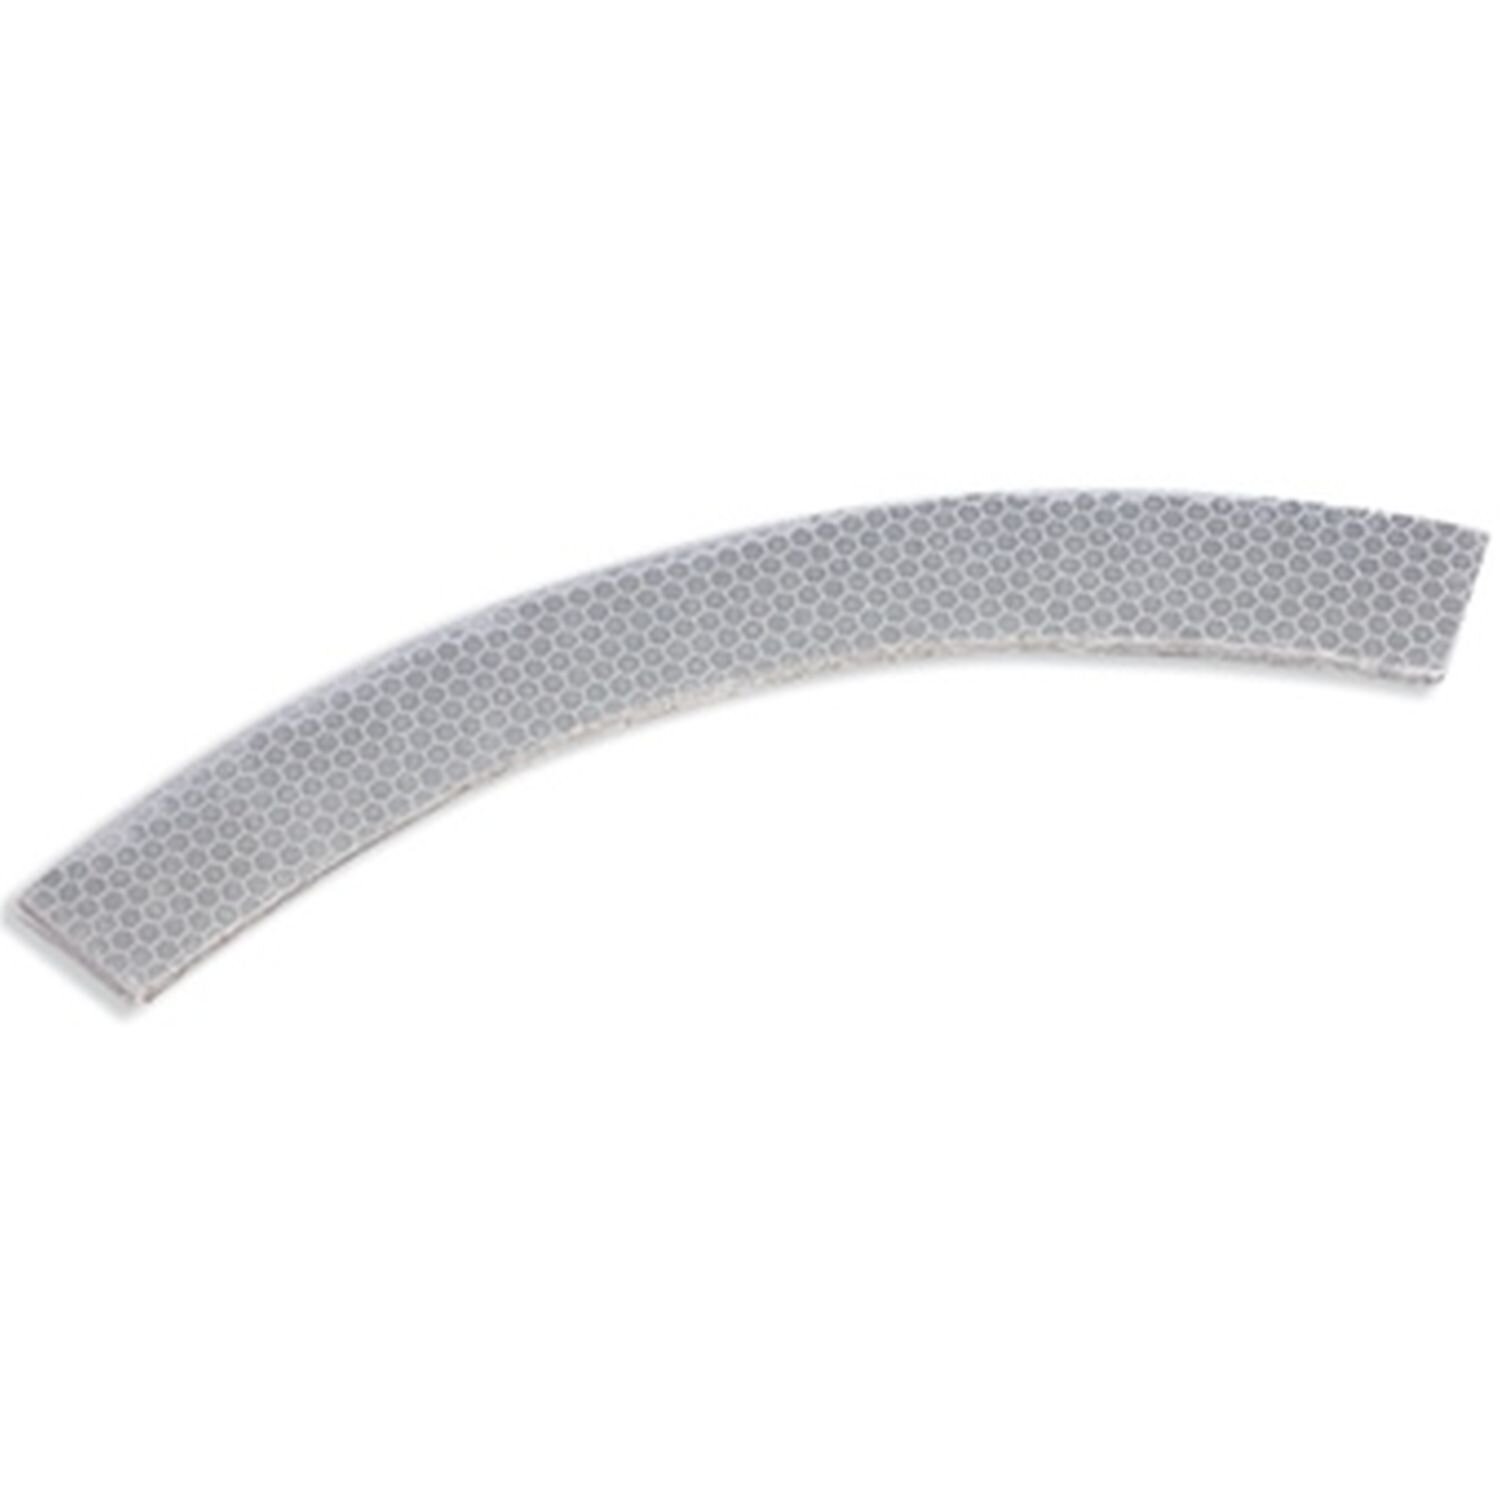 Hard Hat Reflective Tape Curved Pkt 10